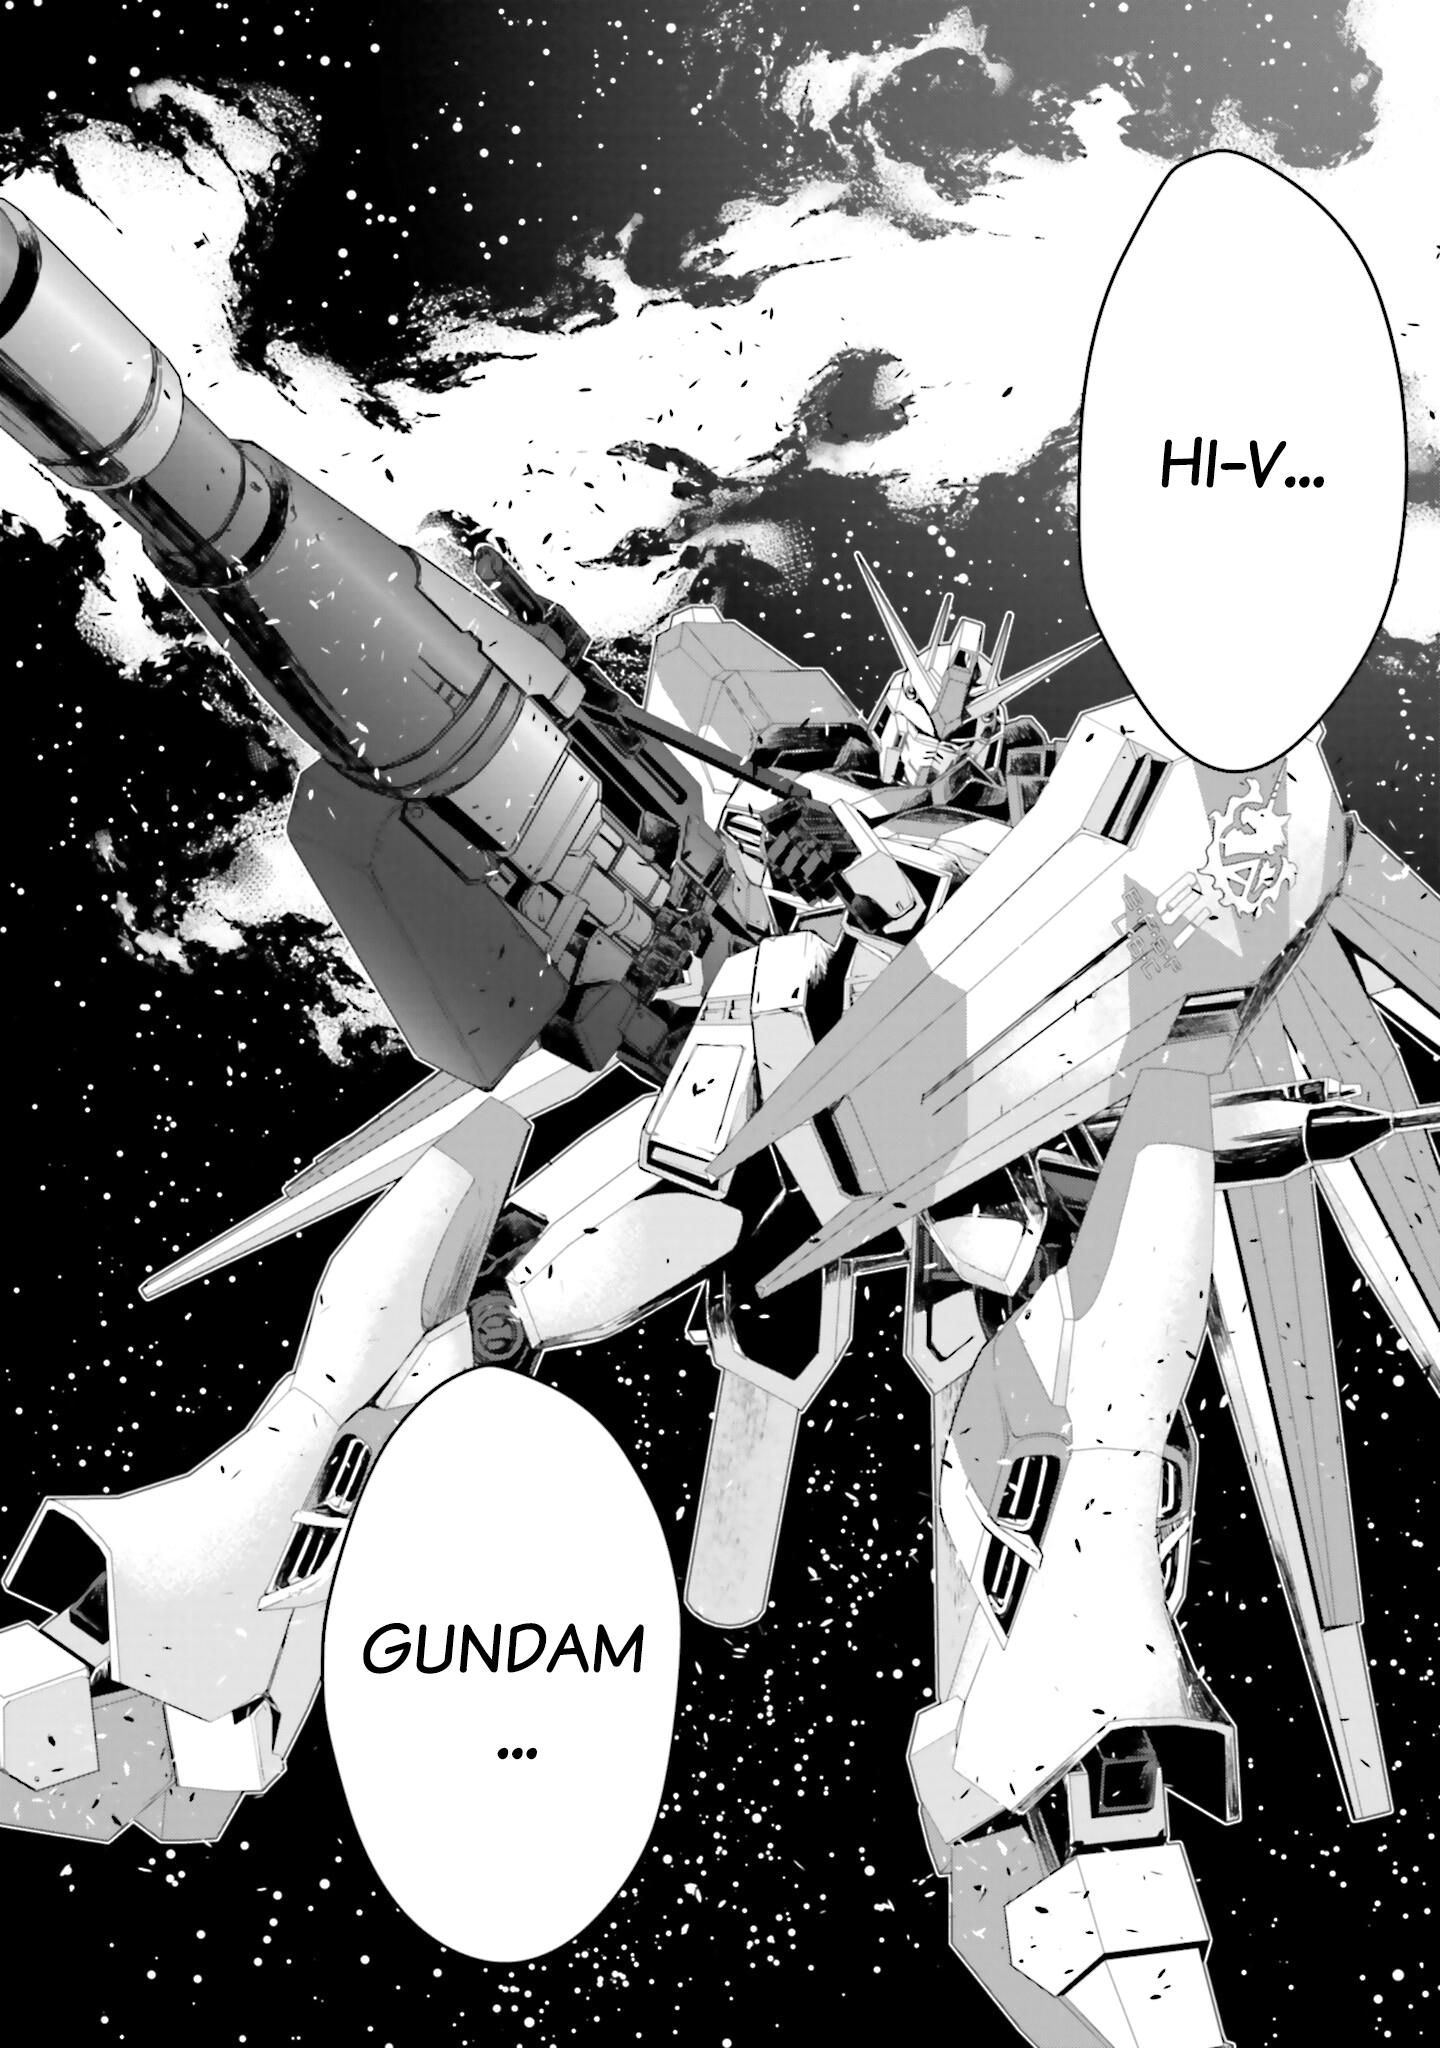 Mobile Suit Gundam N-Extreme Vol.1 Chapter 5: Mission 5 [Beyond The Axis] -Part 2- - Picture 2